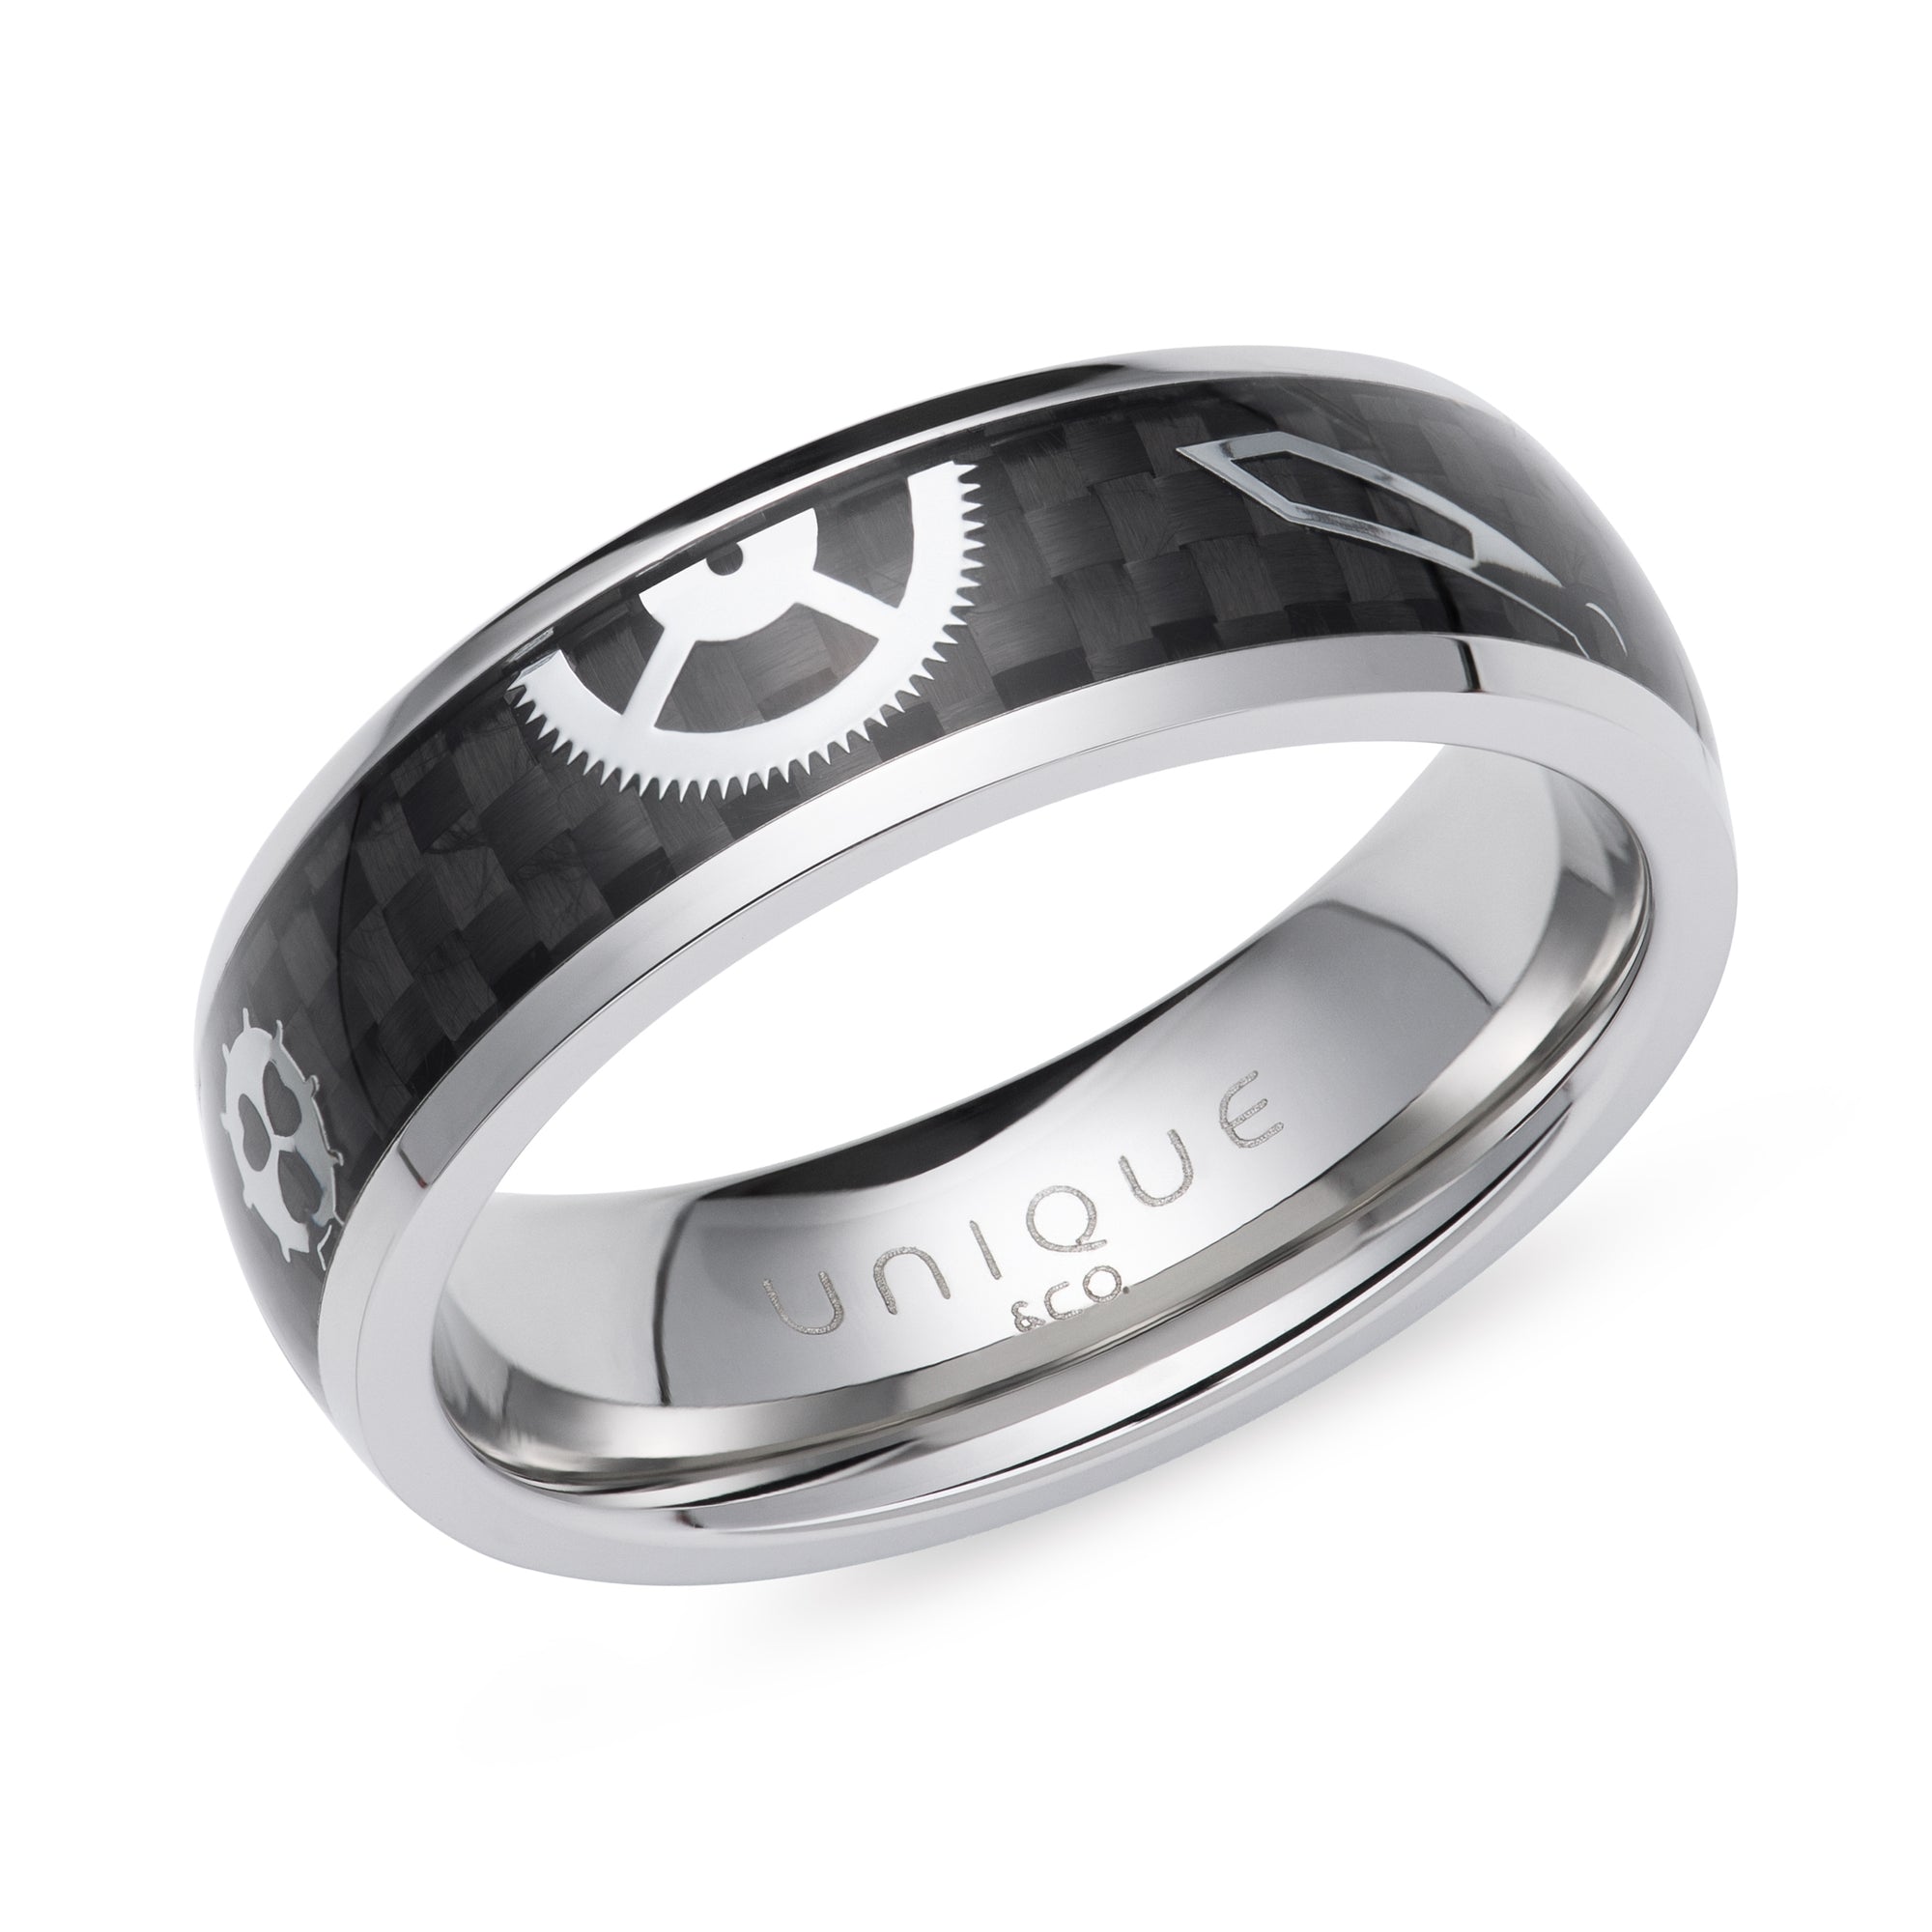 Men's Stainless Steel Ring with Carbon Fibre Inlay